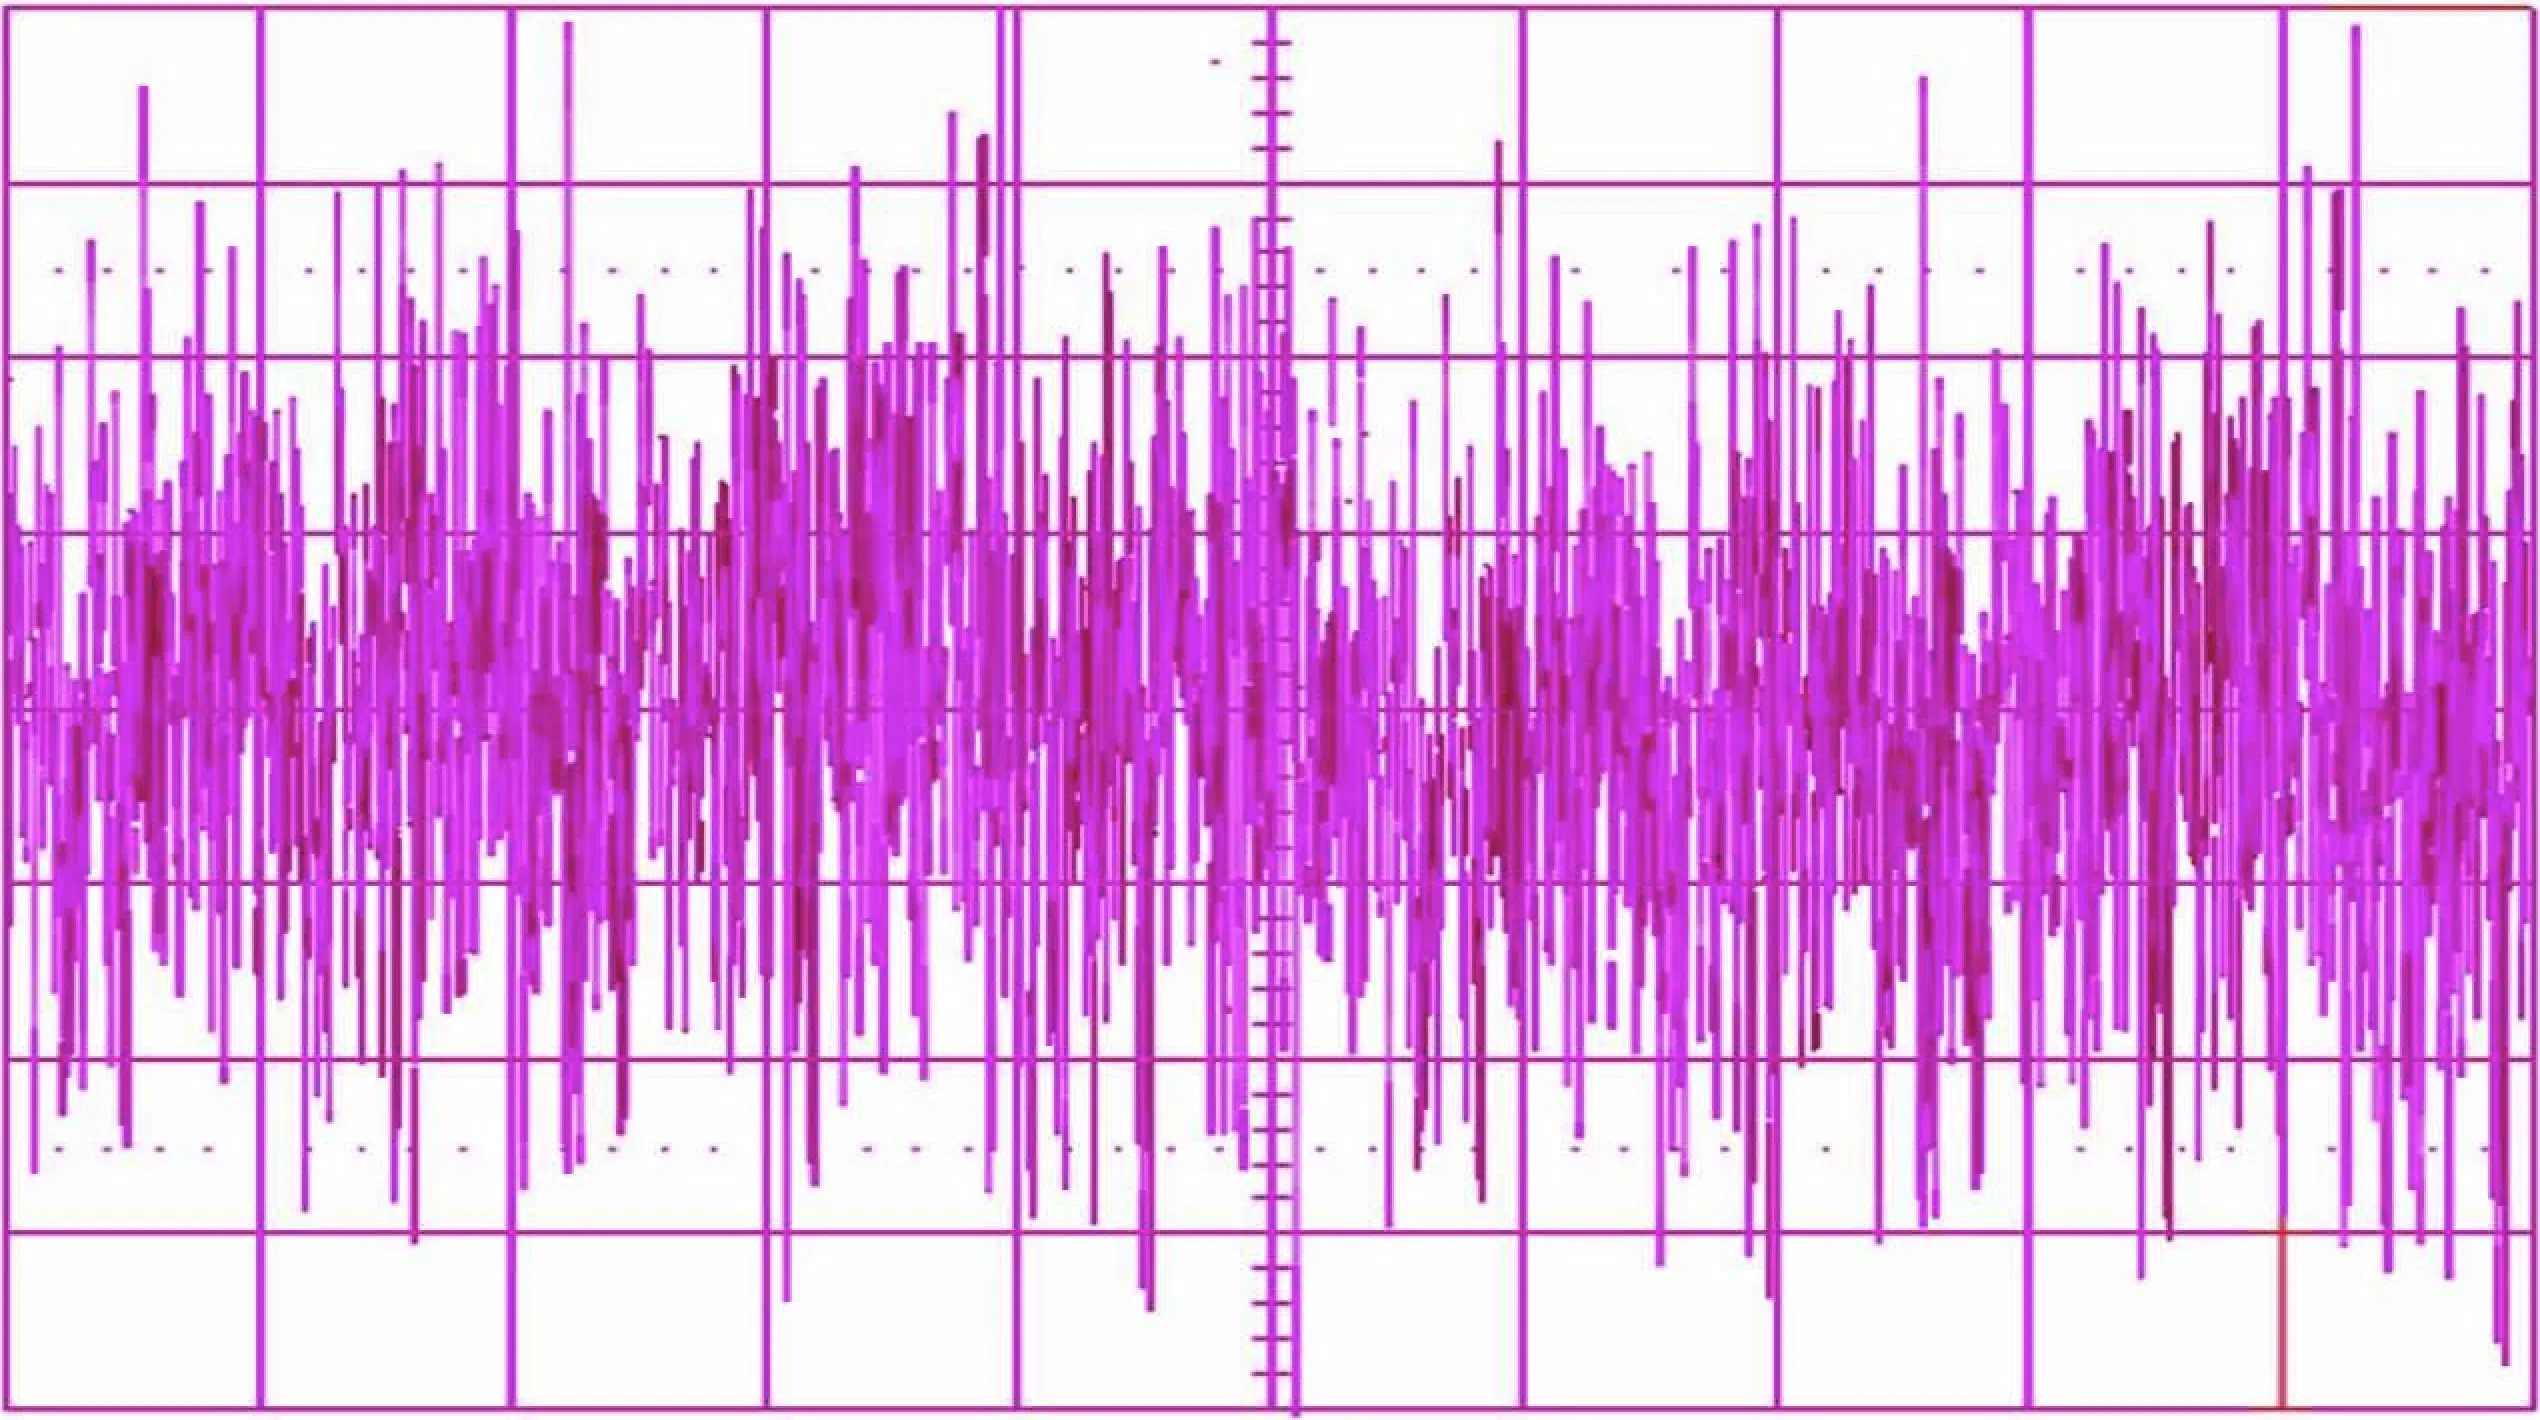 brown noise vs pink noise